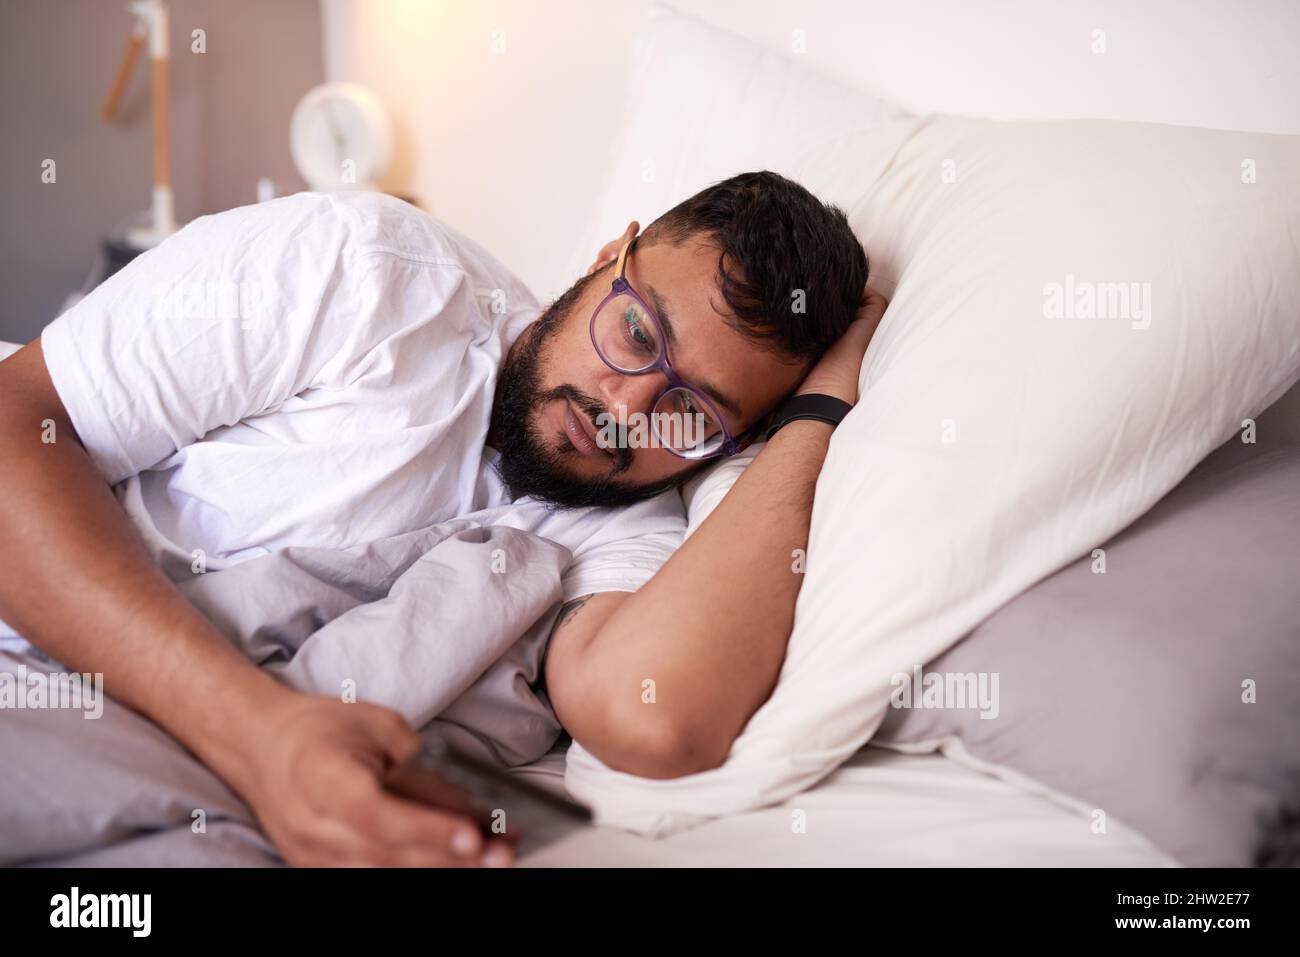 A man wearing spectacles looking at his mobile phone while lying in bed Stock Photo